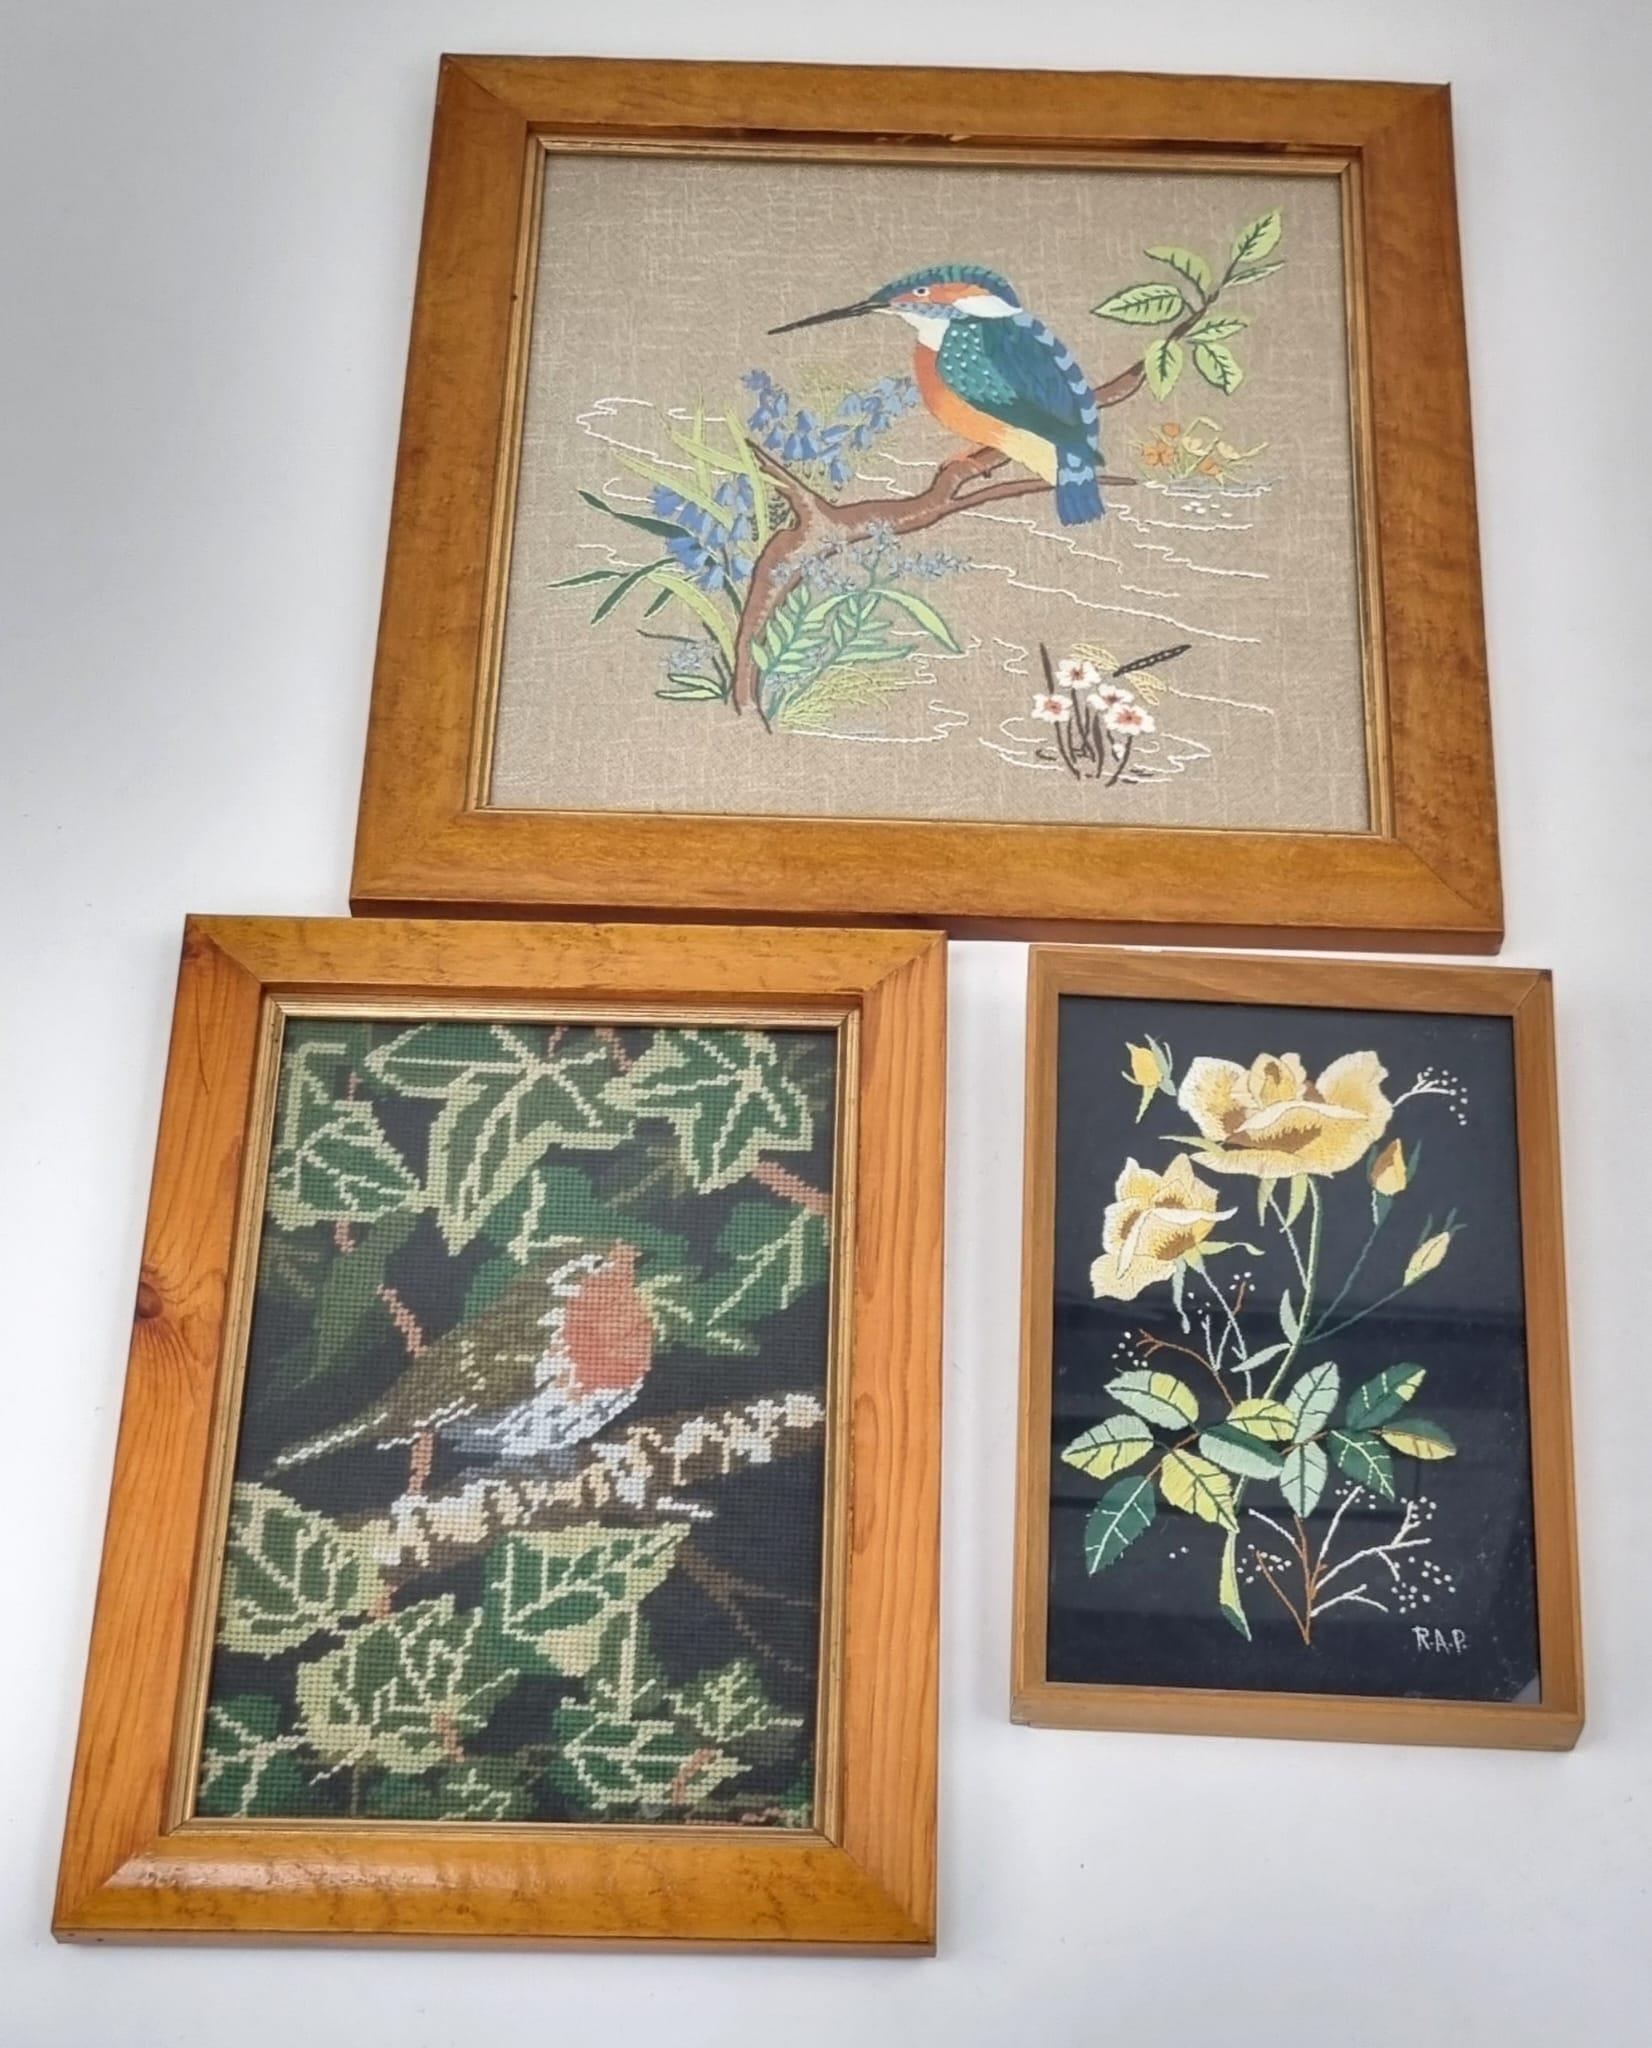 Three Well-Crafted Woven Fabric Artworks. Two Avian inspired and one floral. In frame, largest piece